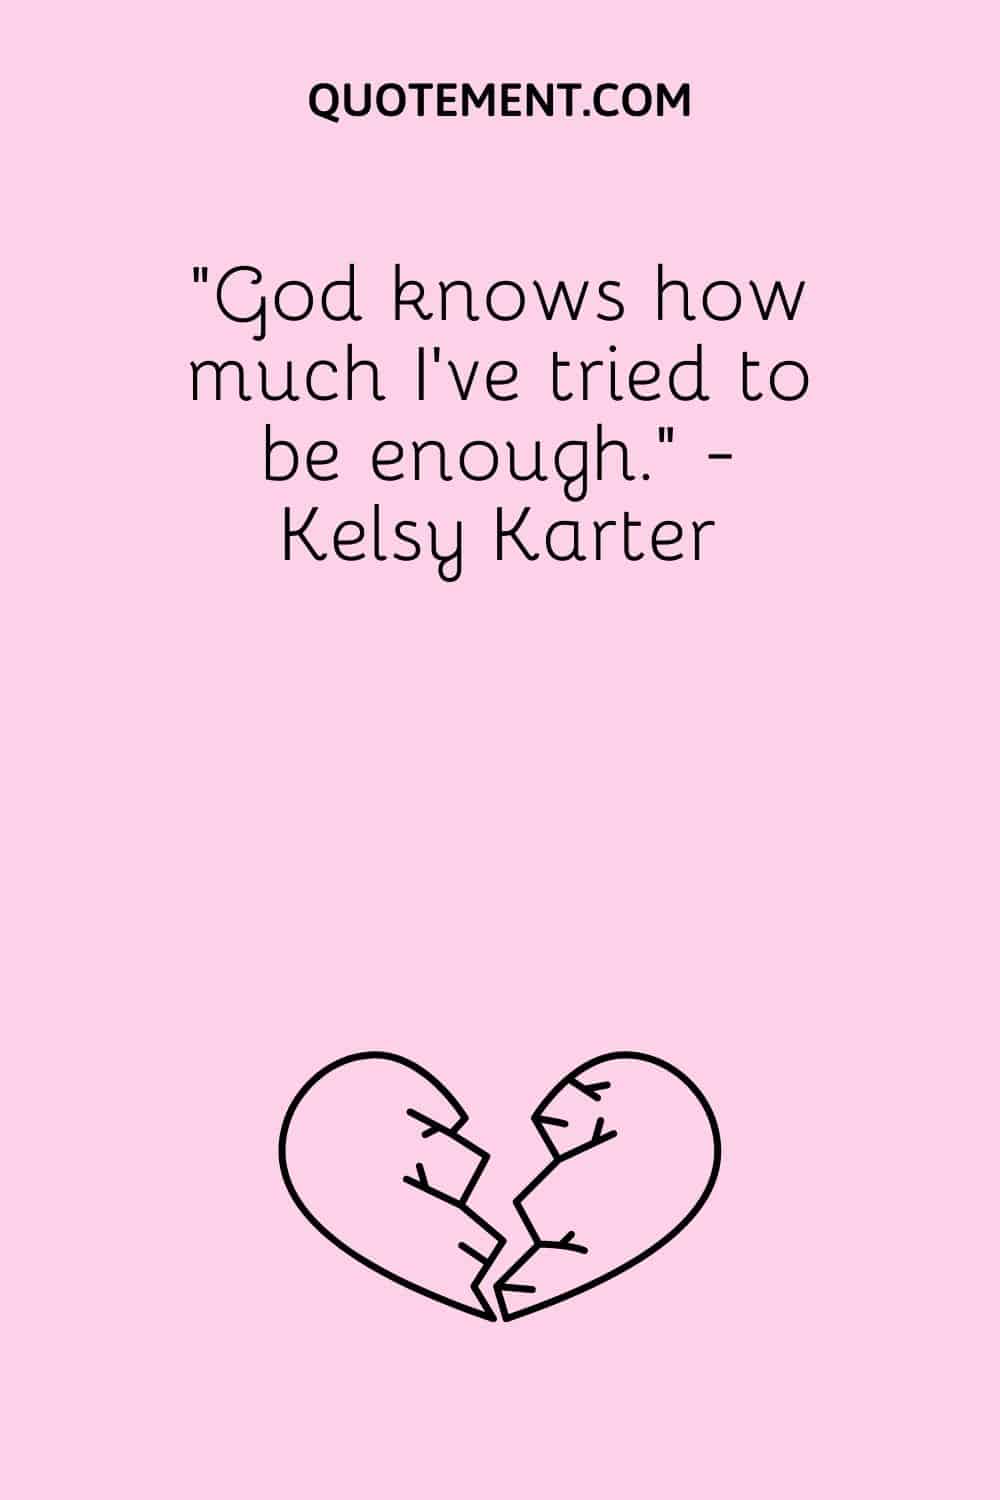 “God knows how much I've tried to be enough.” - Kelsy Karter